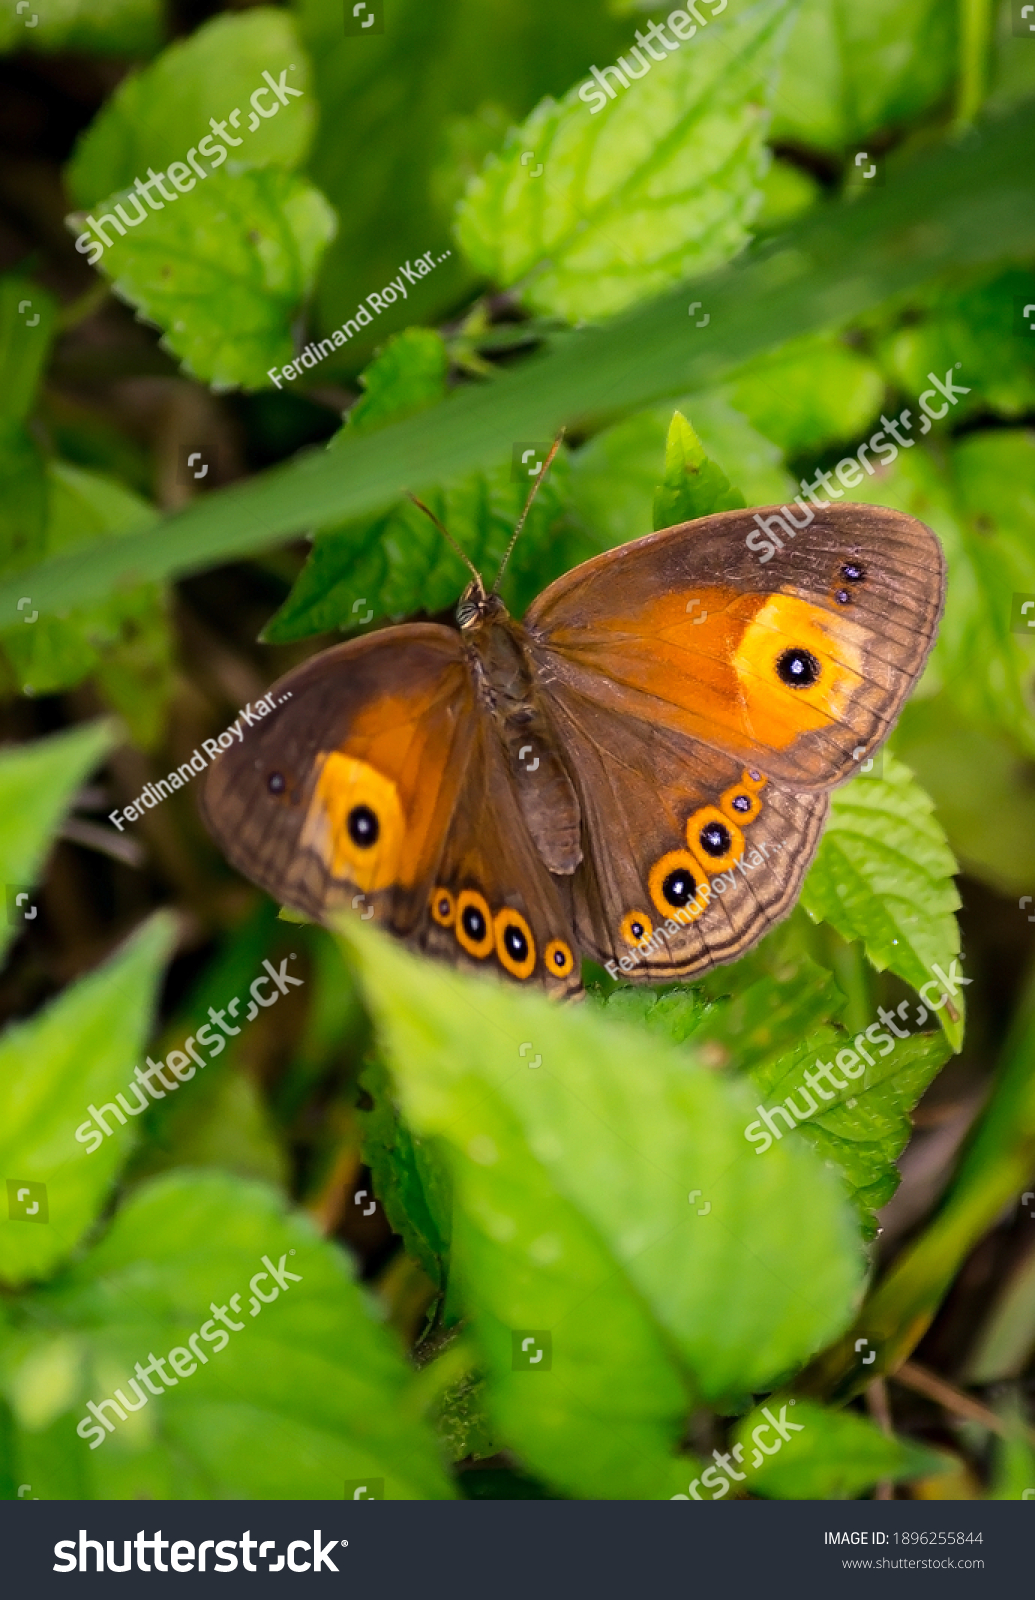 Tussock ringlet, also known as Common tussok. Perched on a weed flower #1896255844